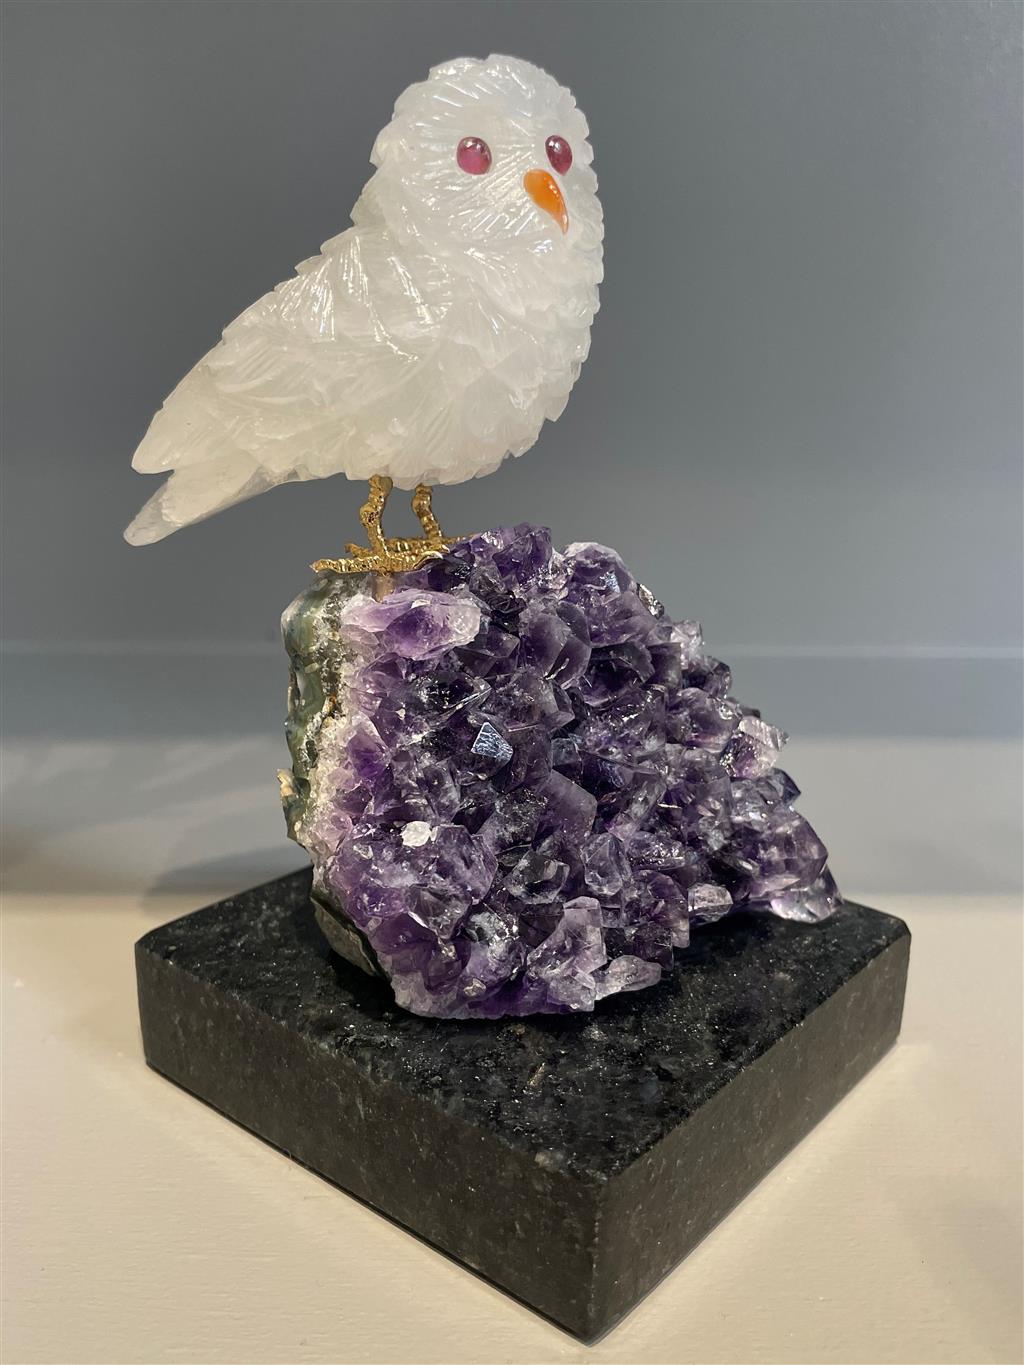 Hand-carved Rock Crystal Owl on Amethyst Crystals